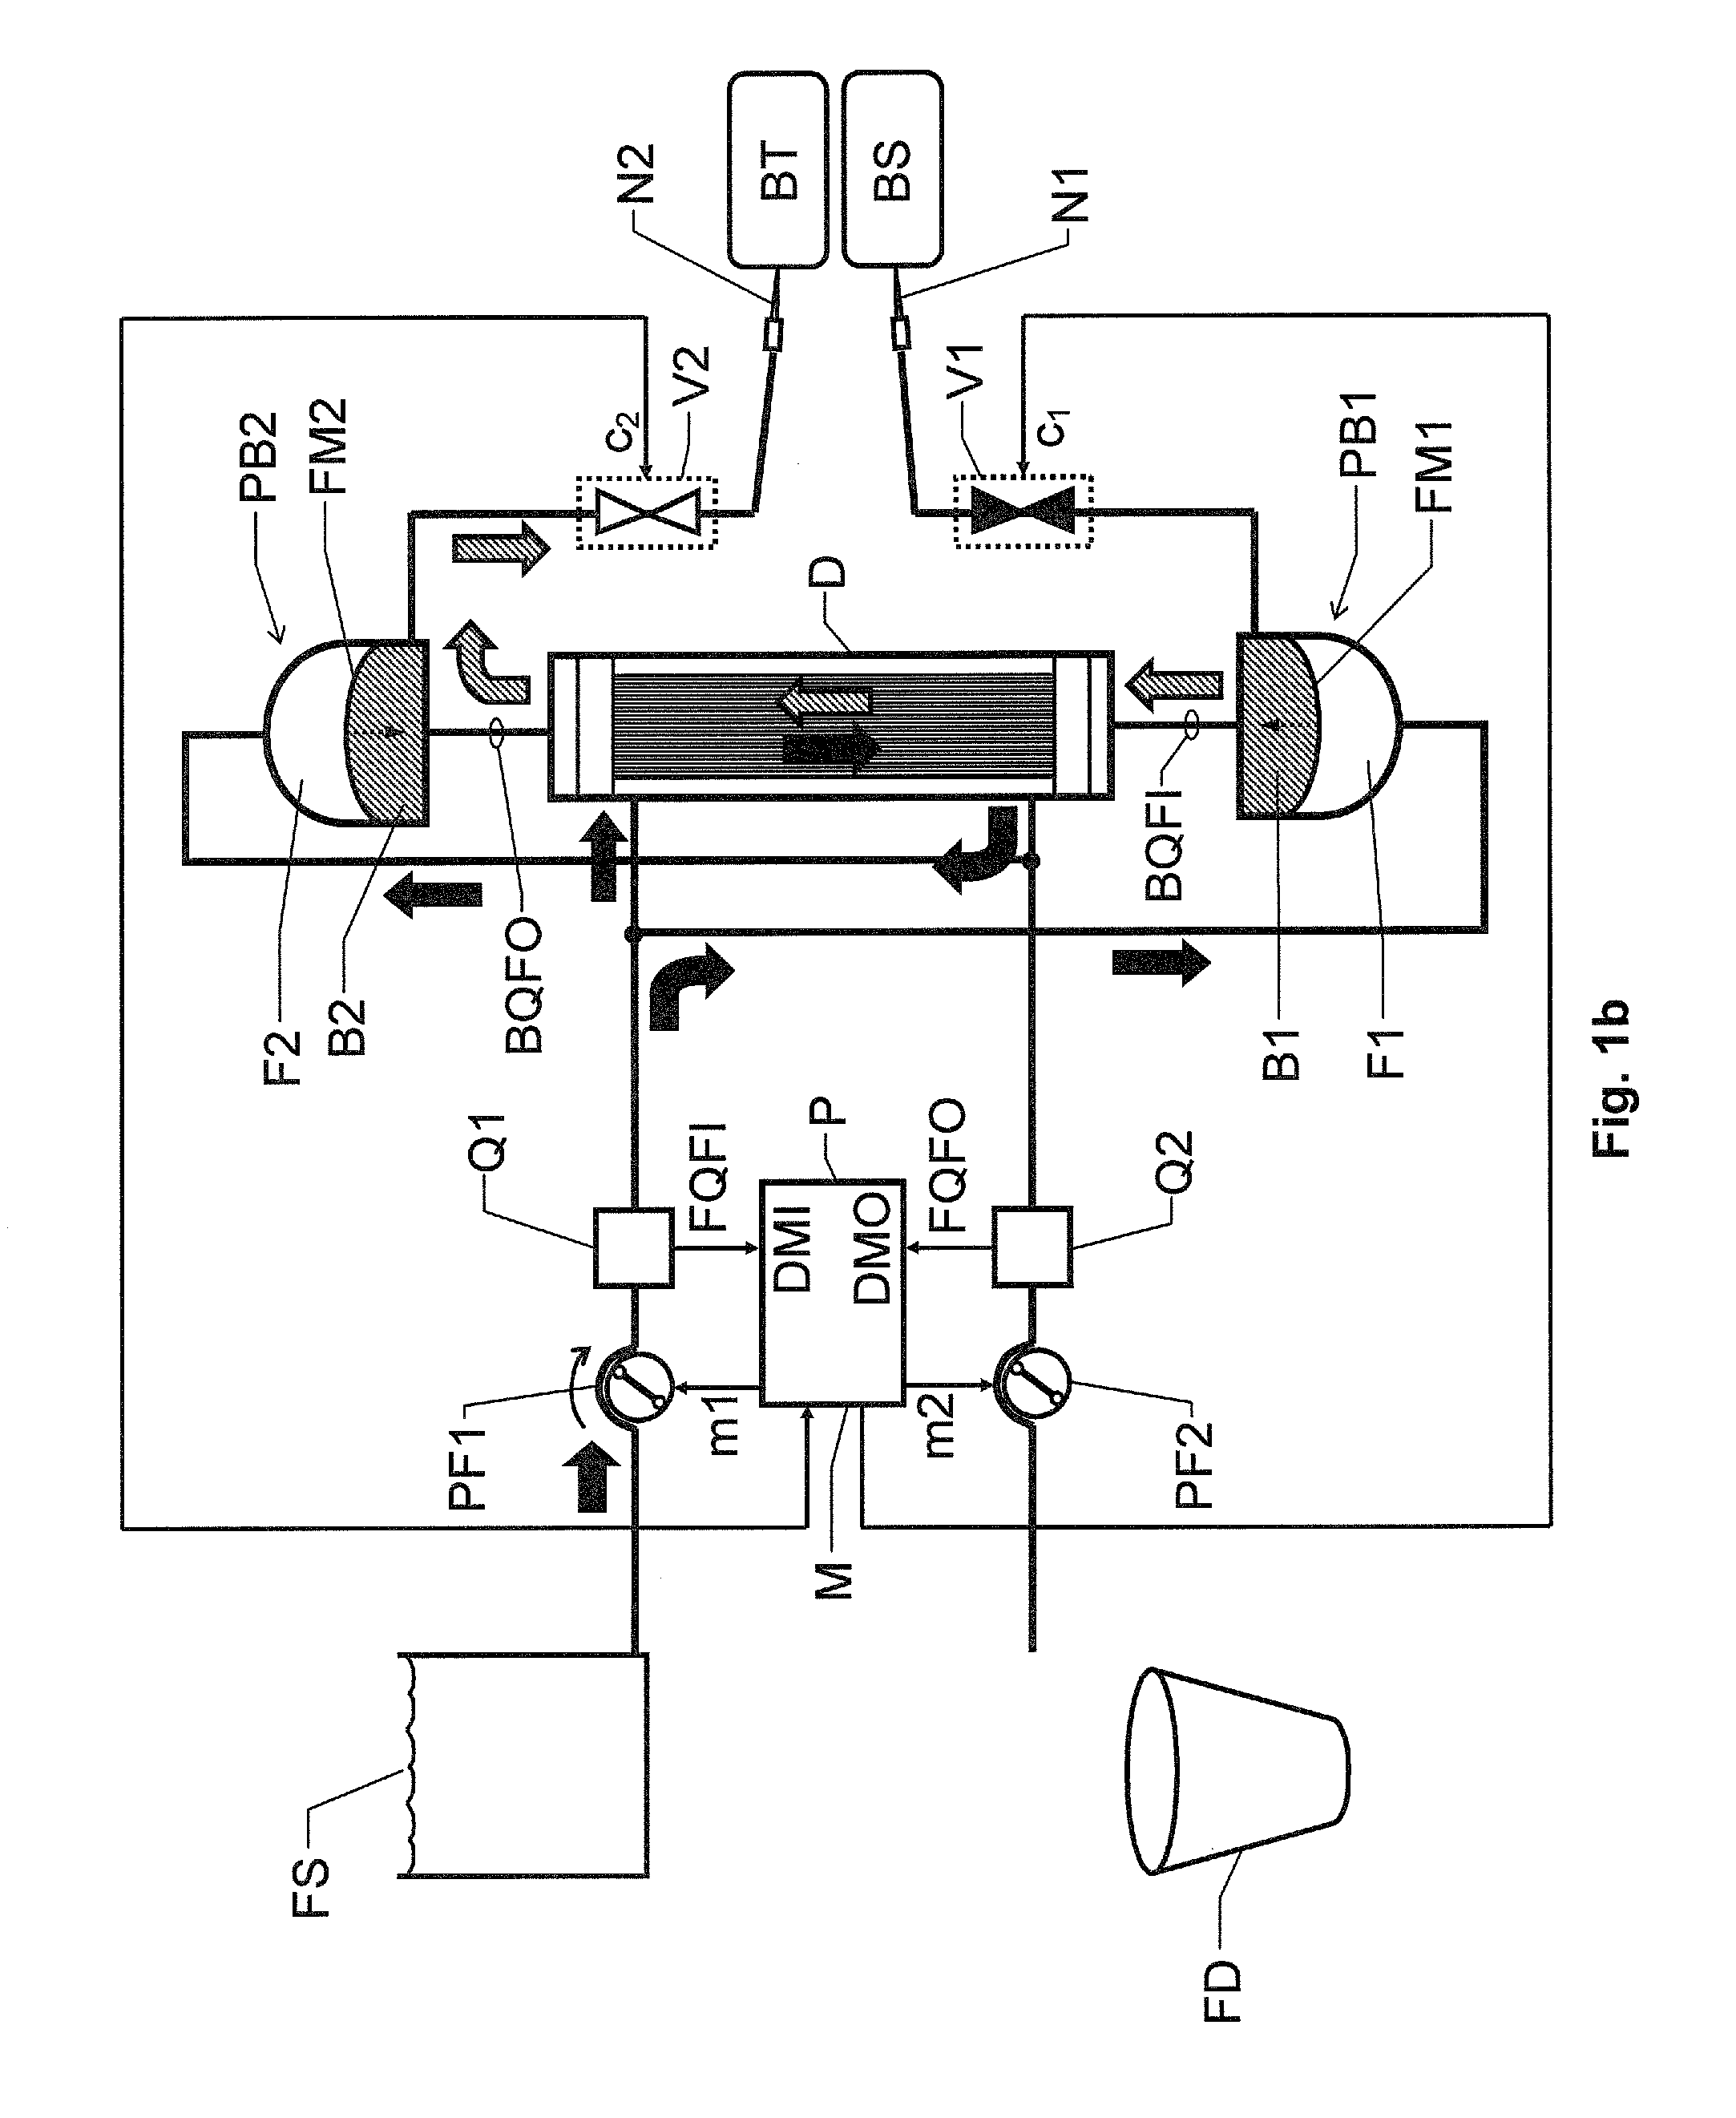 Blood treatment apparatus and method